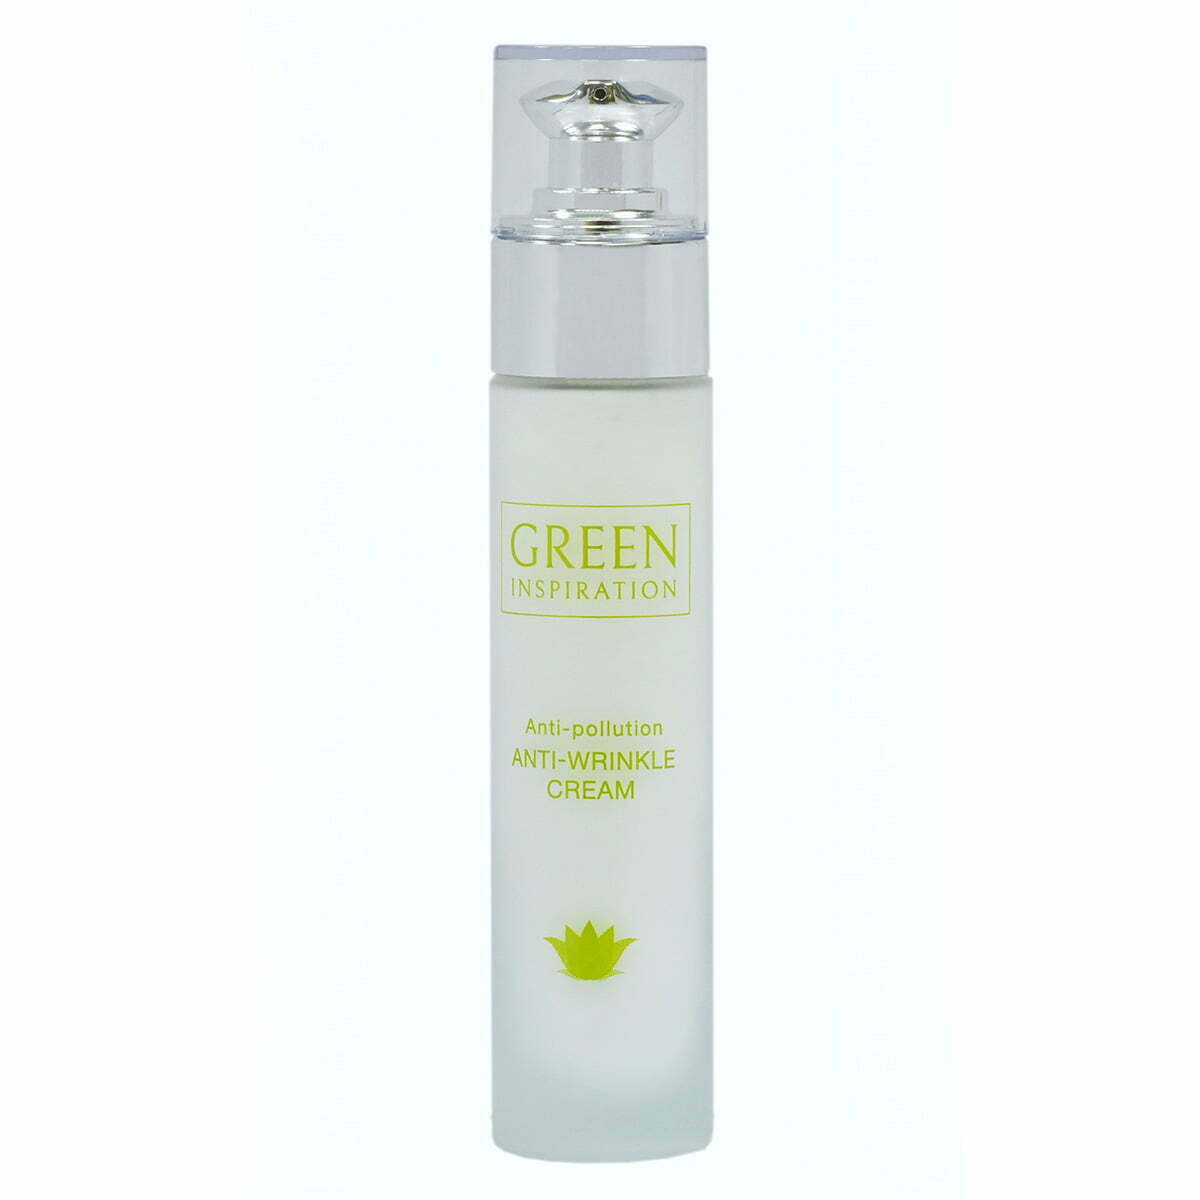 Green Inspiration Anti-pollution and Anti-Wrinkle Serum